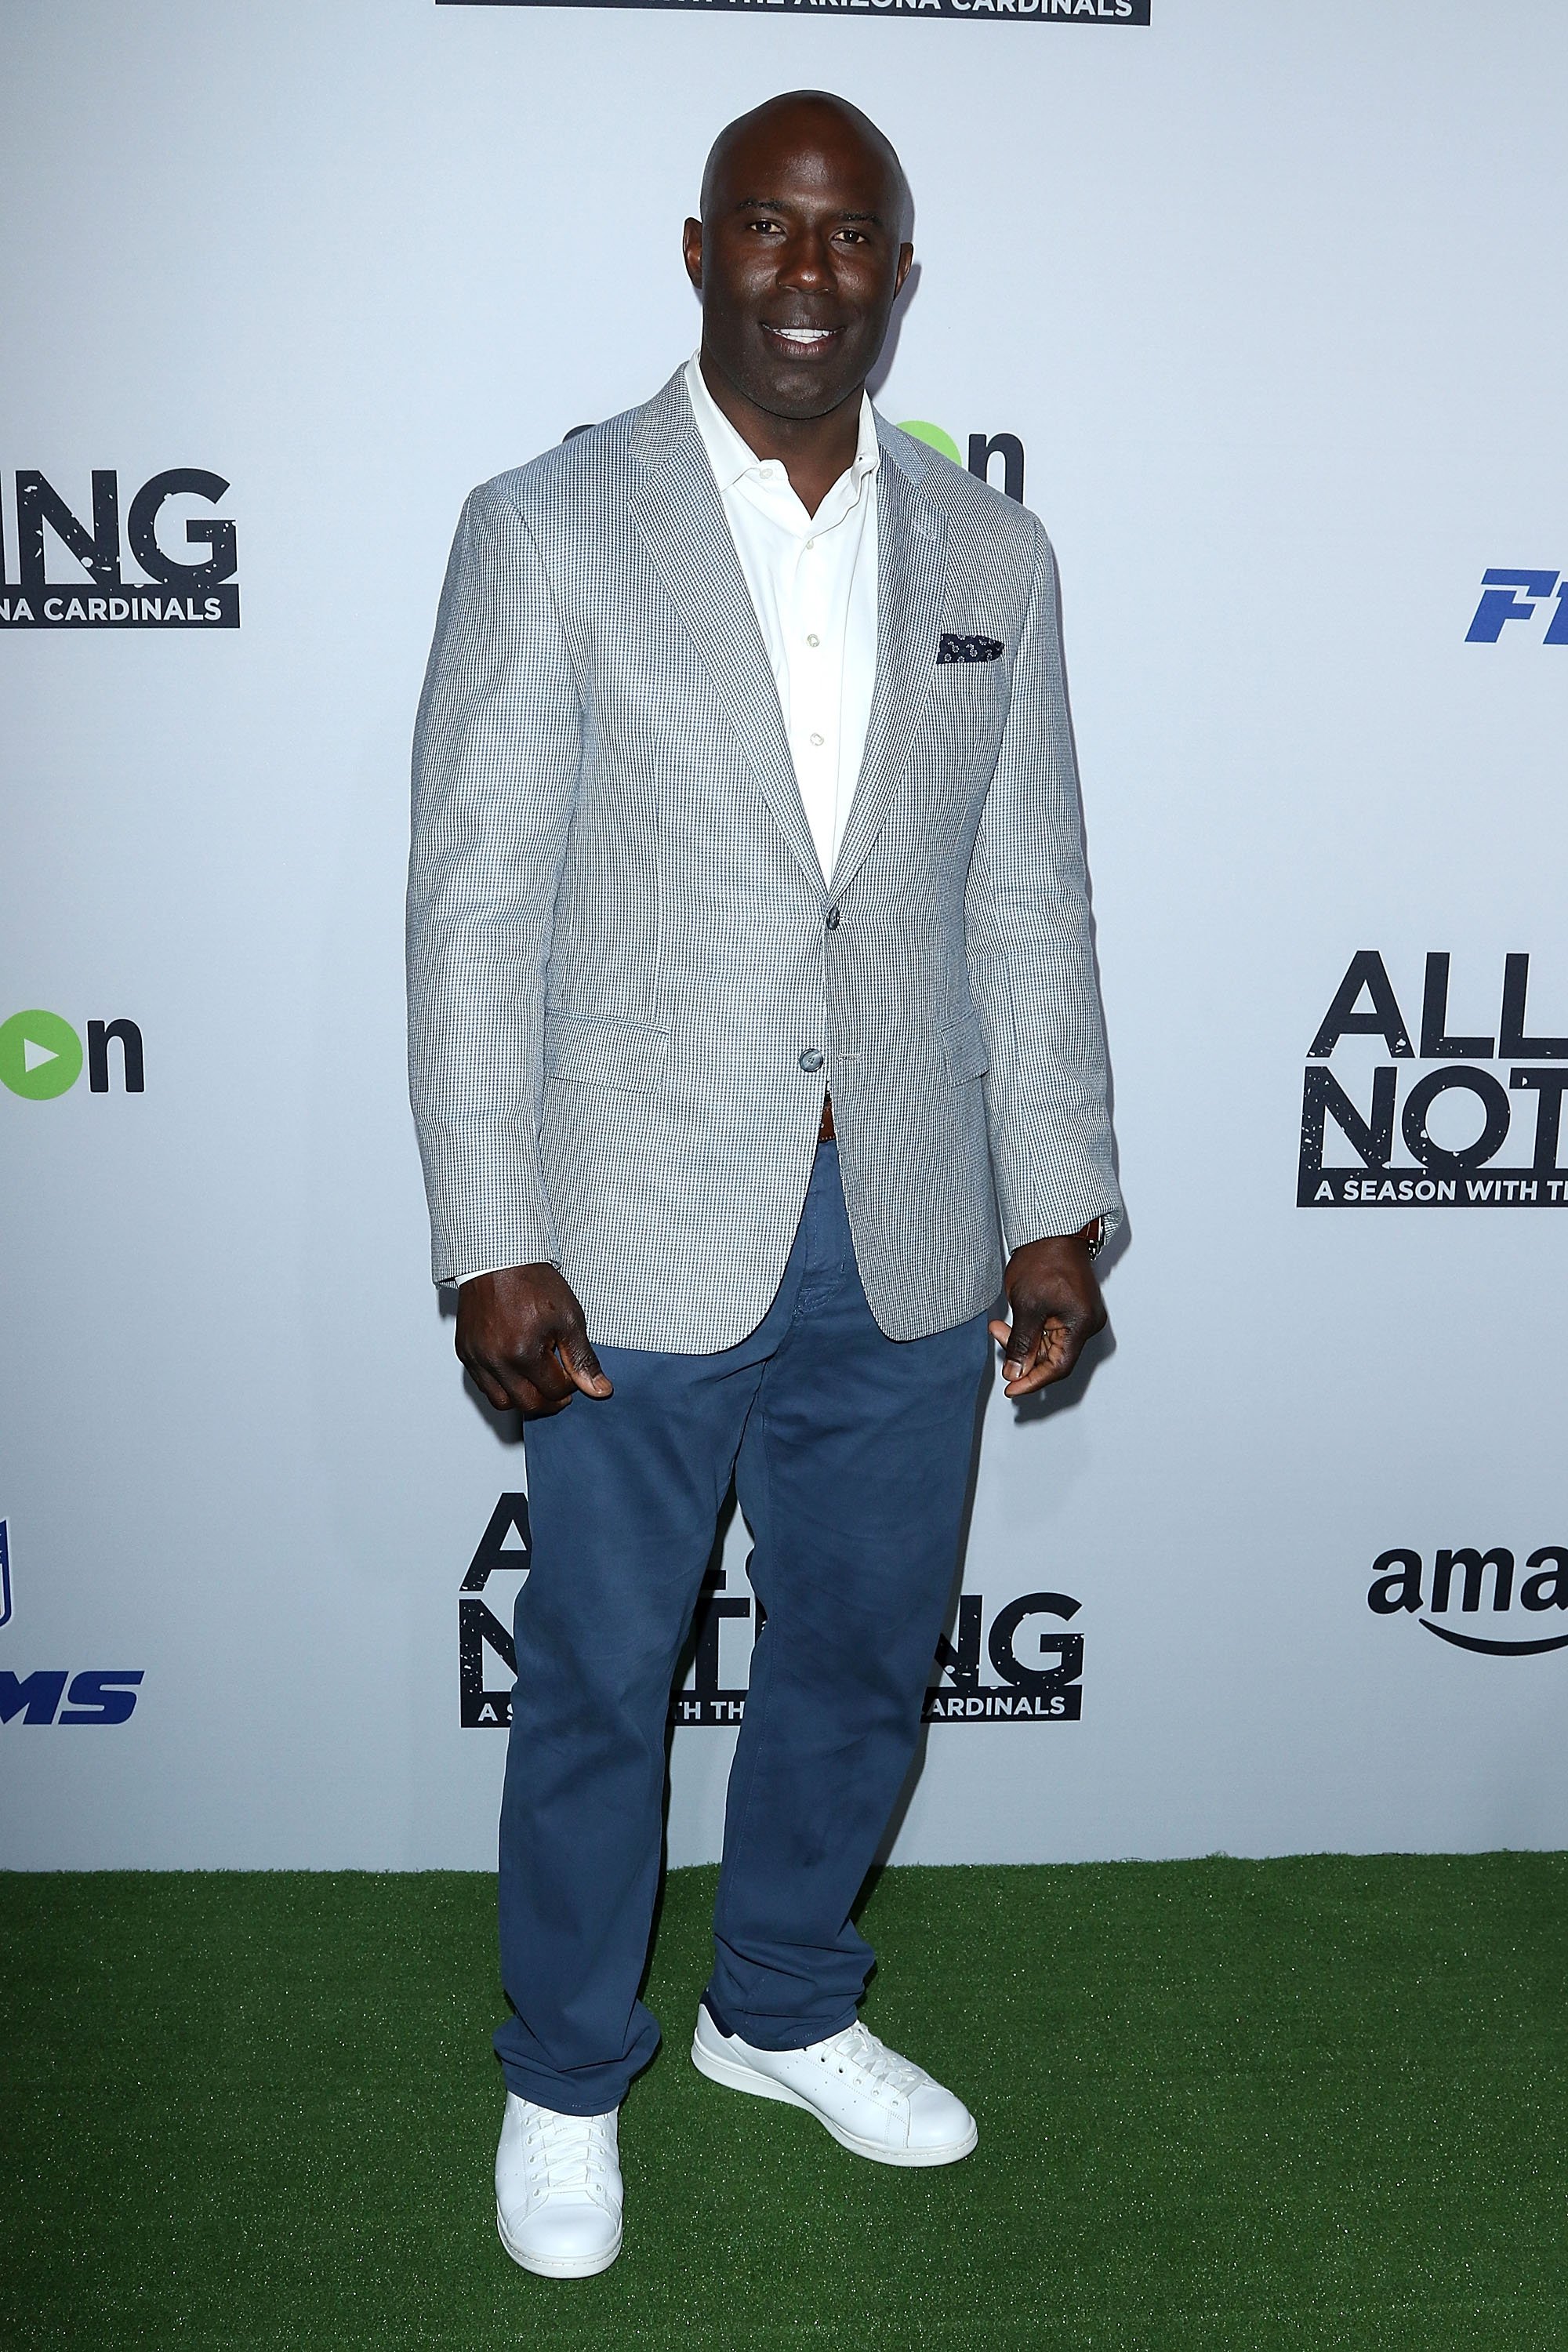 Terrell Davis attends the premiere of Amazon Video's 'All Or Nothing: A Season with The Arizona Cardinals' at Tom's Urban at L.A. Live on June 9, 2016 in Los Angeles, California. | Photo: GettyImages